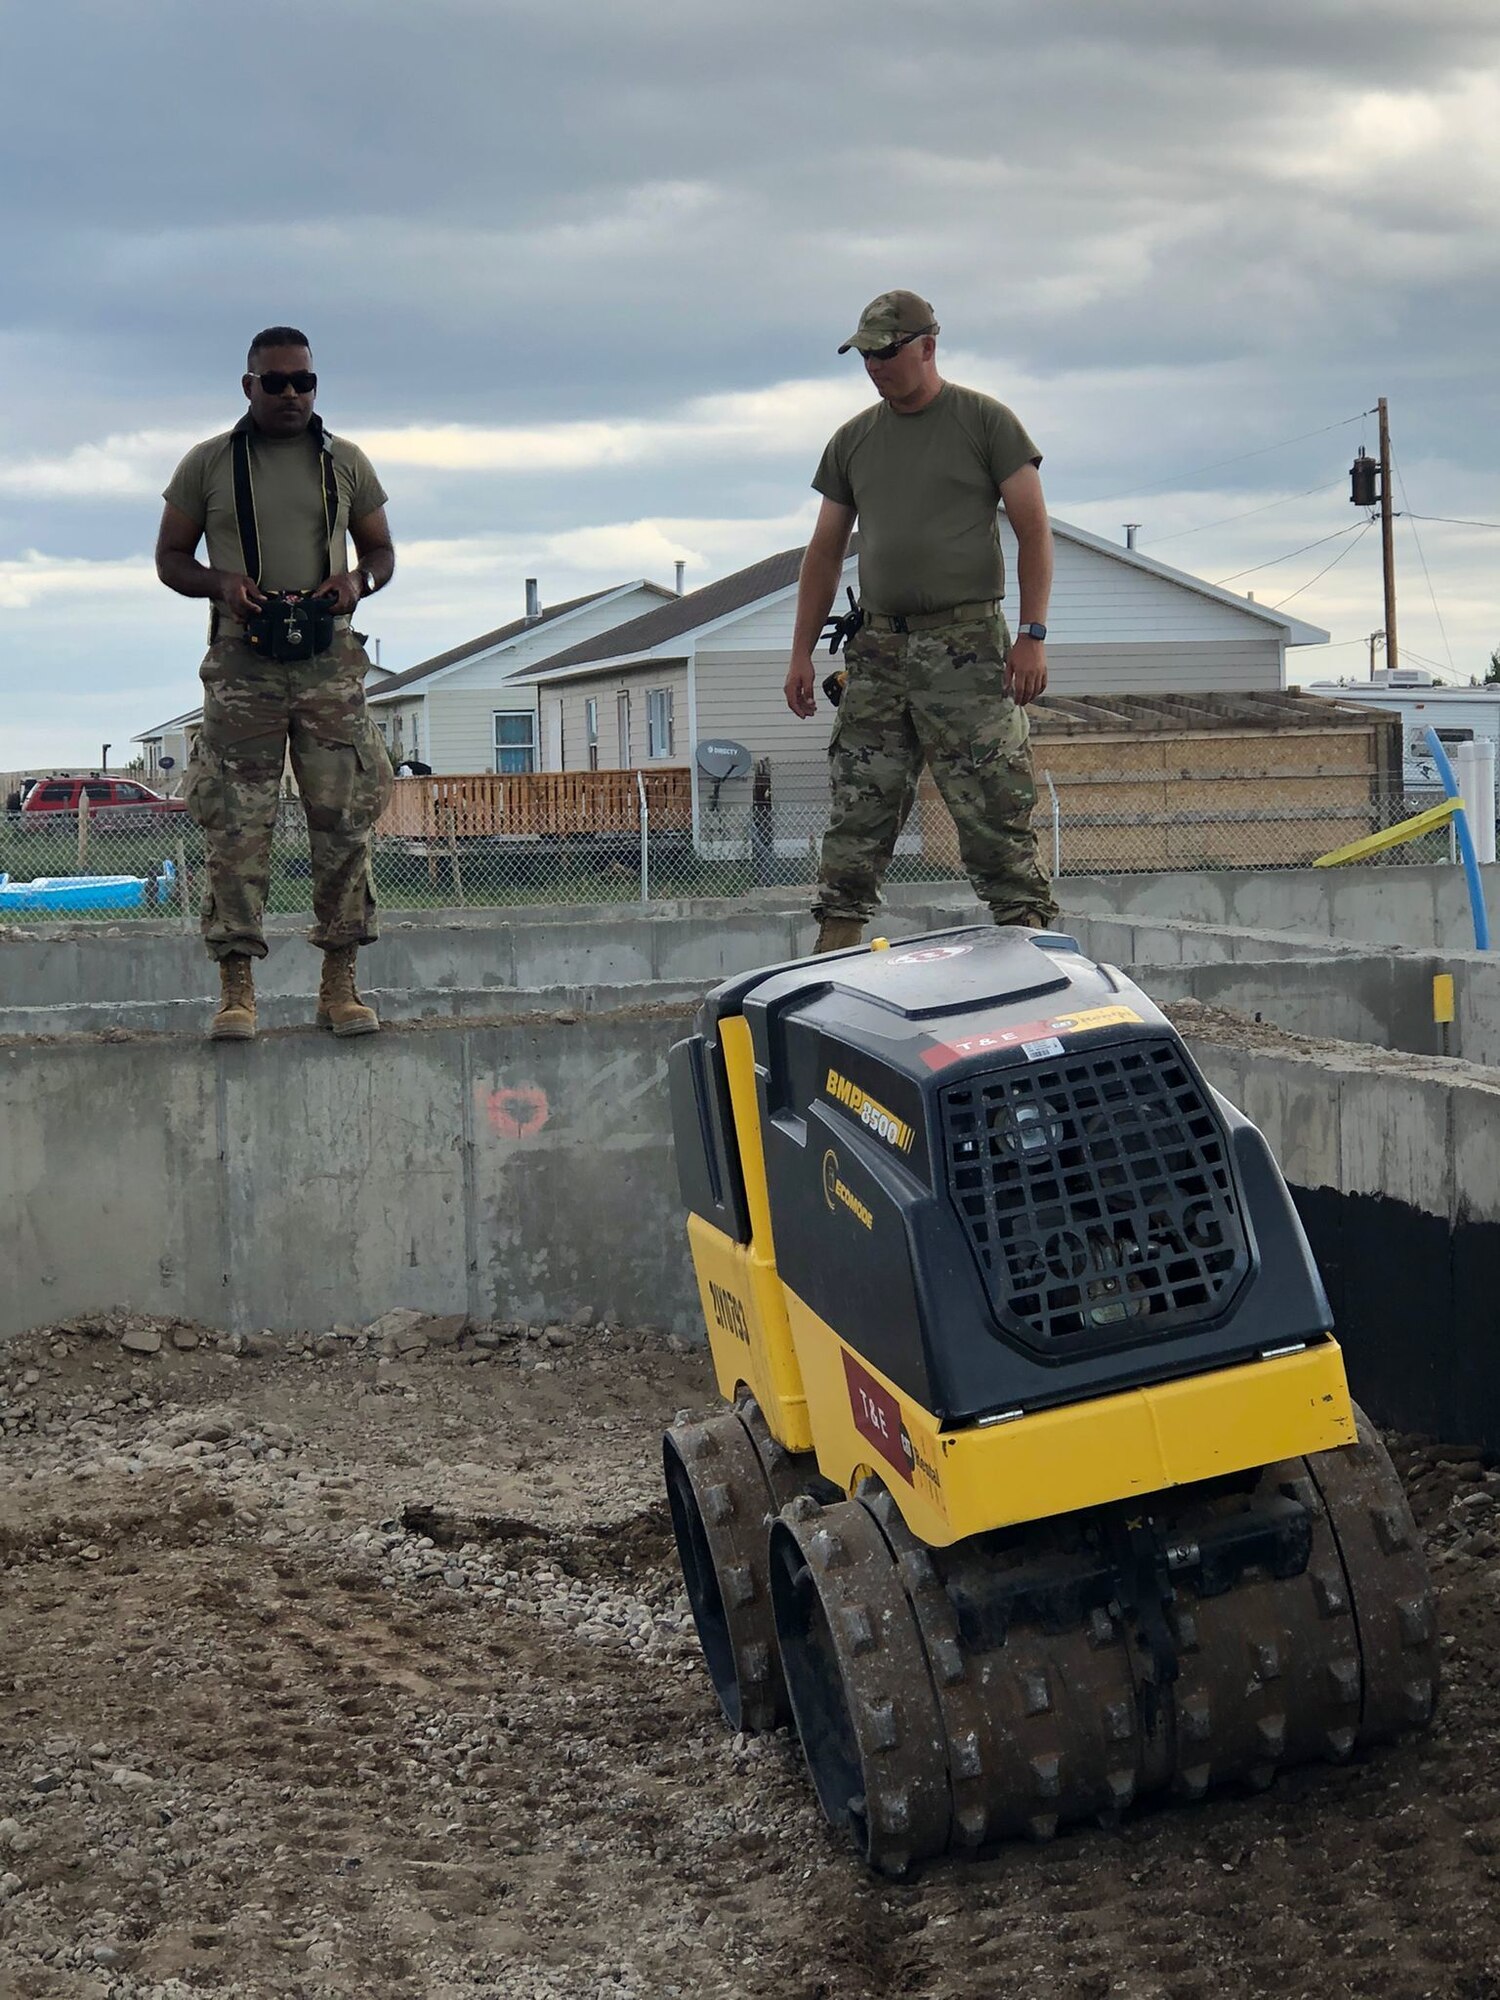 Two Airmen operating a remotely controlled piece of construction equipment outside.